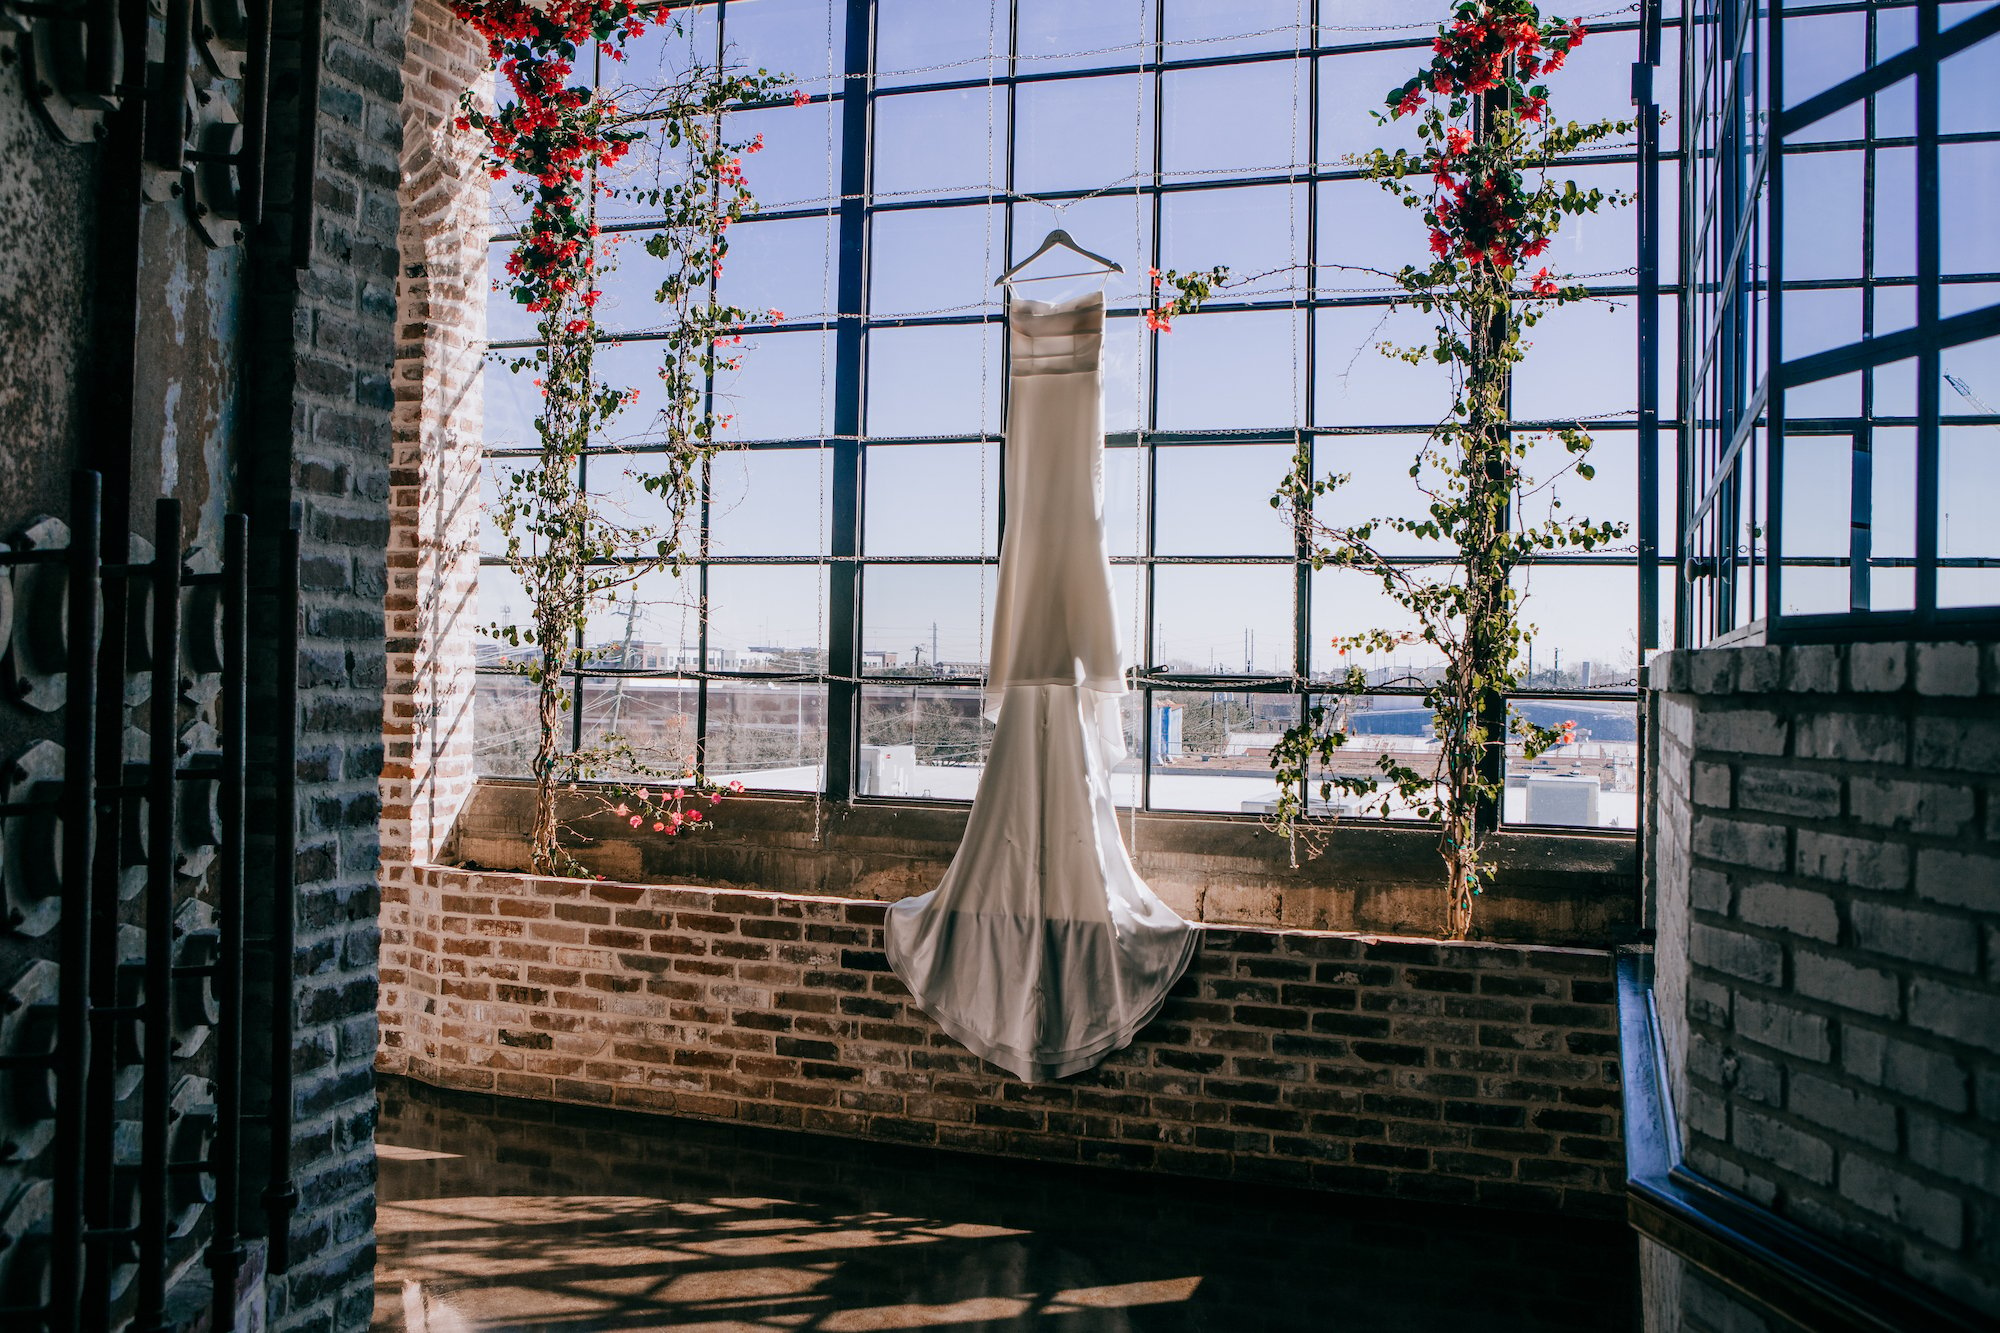 A wedding gown hangs in front of a window at a wedding venue in Houston.